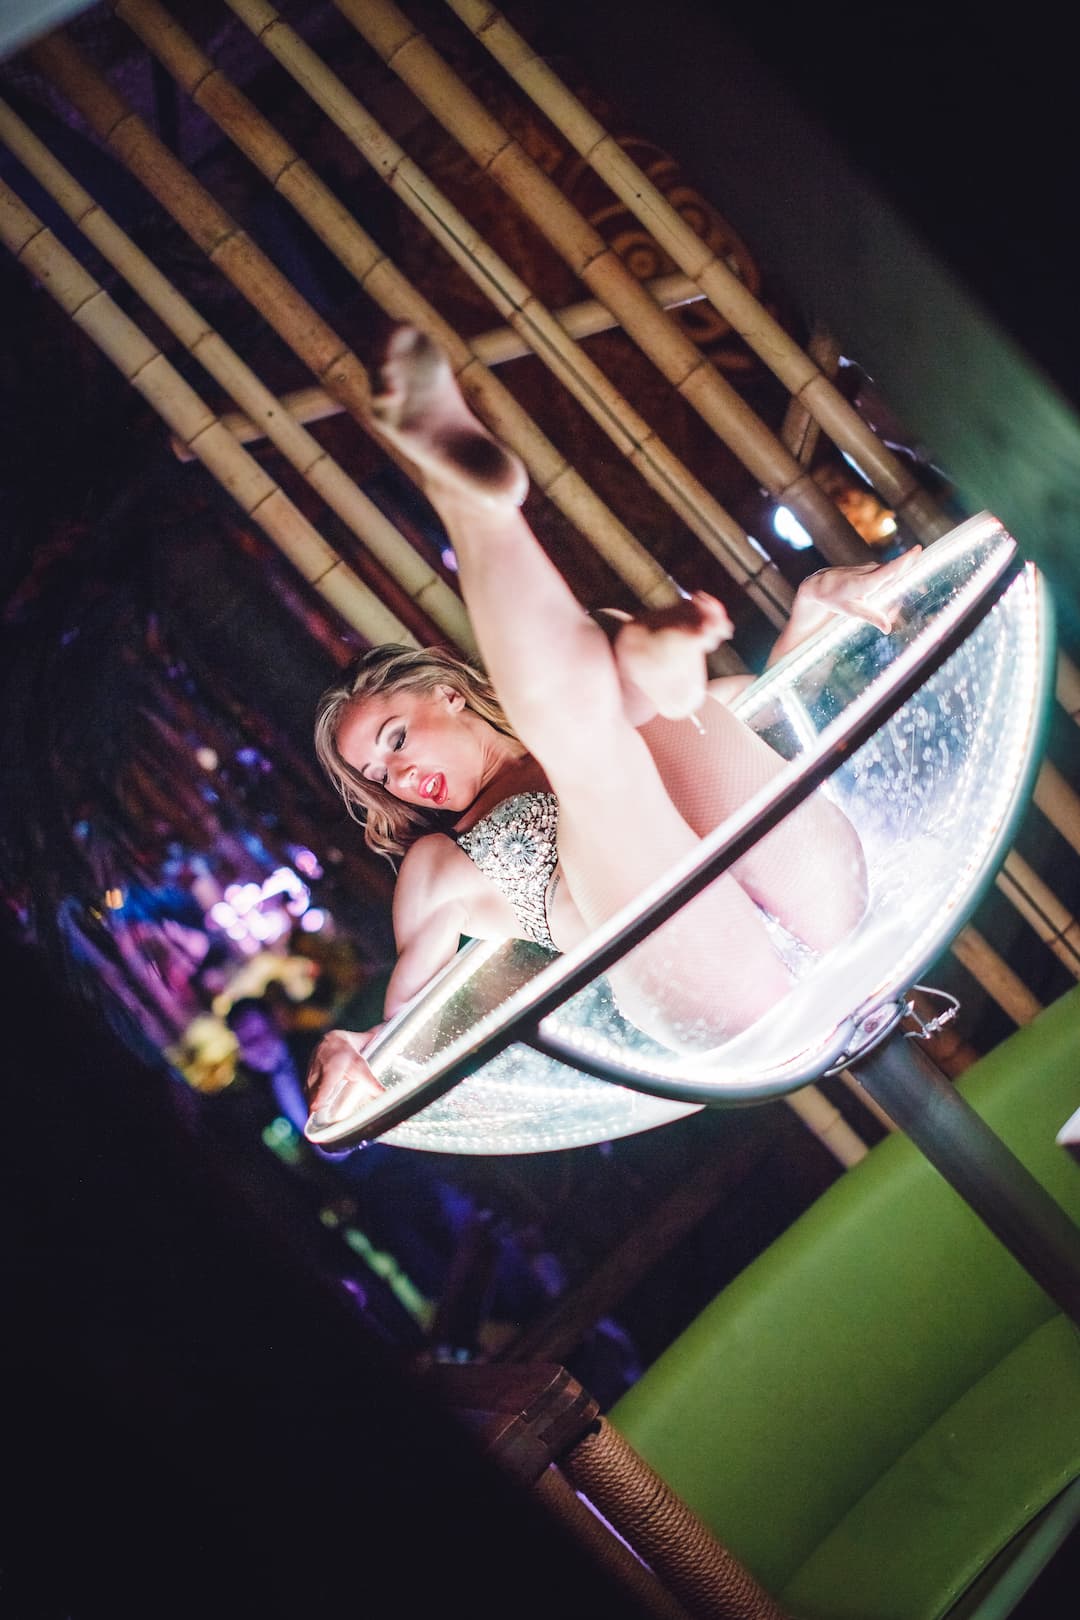 BOOK GIANT MARTINI GLASS PERFORMER IN MIAMI – Event Entertainment Agency  Aerial Artistry